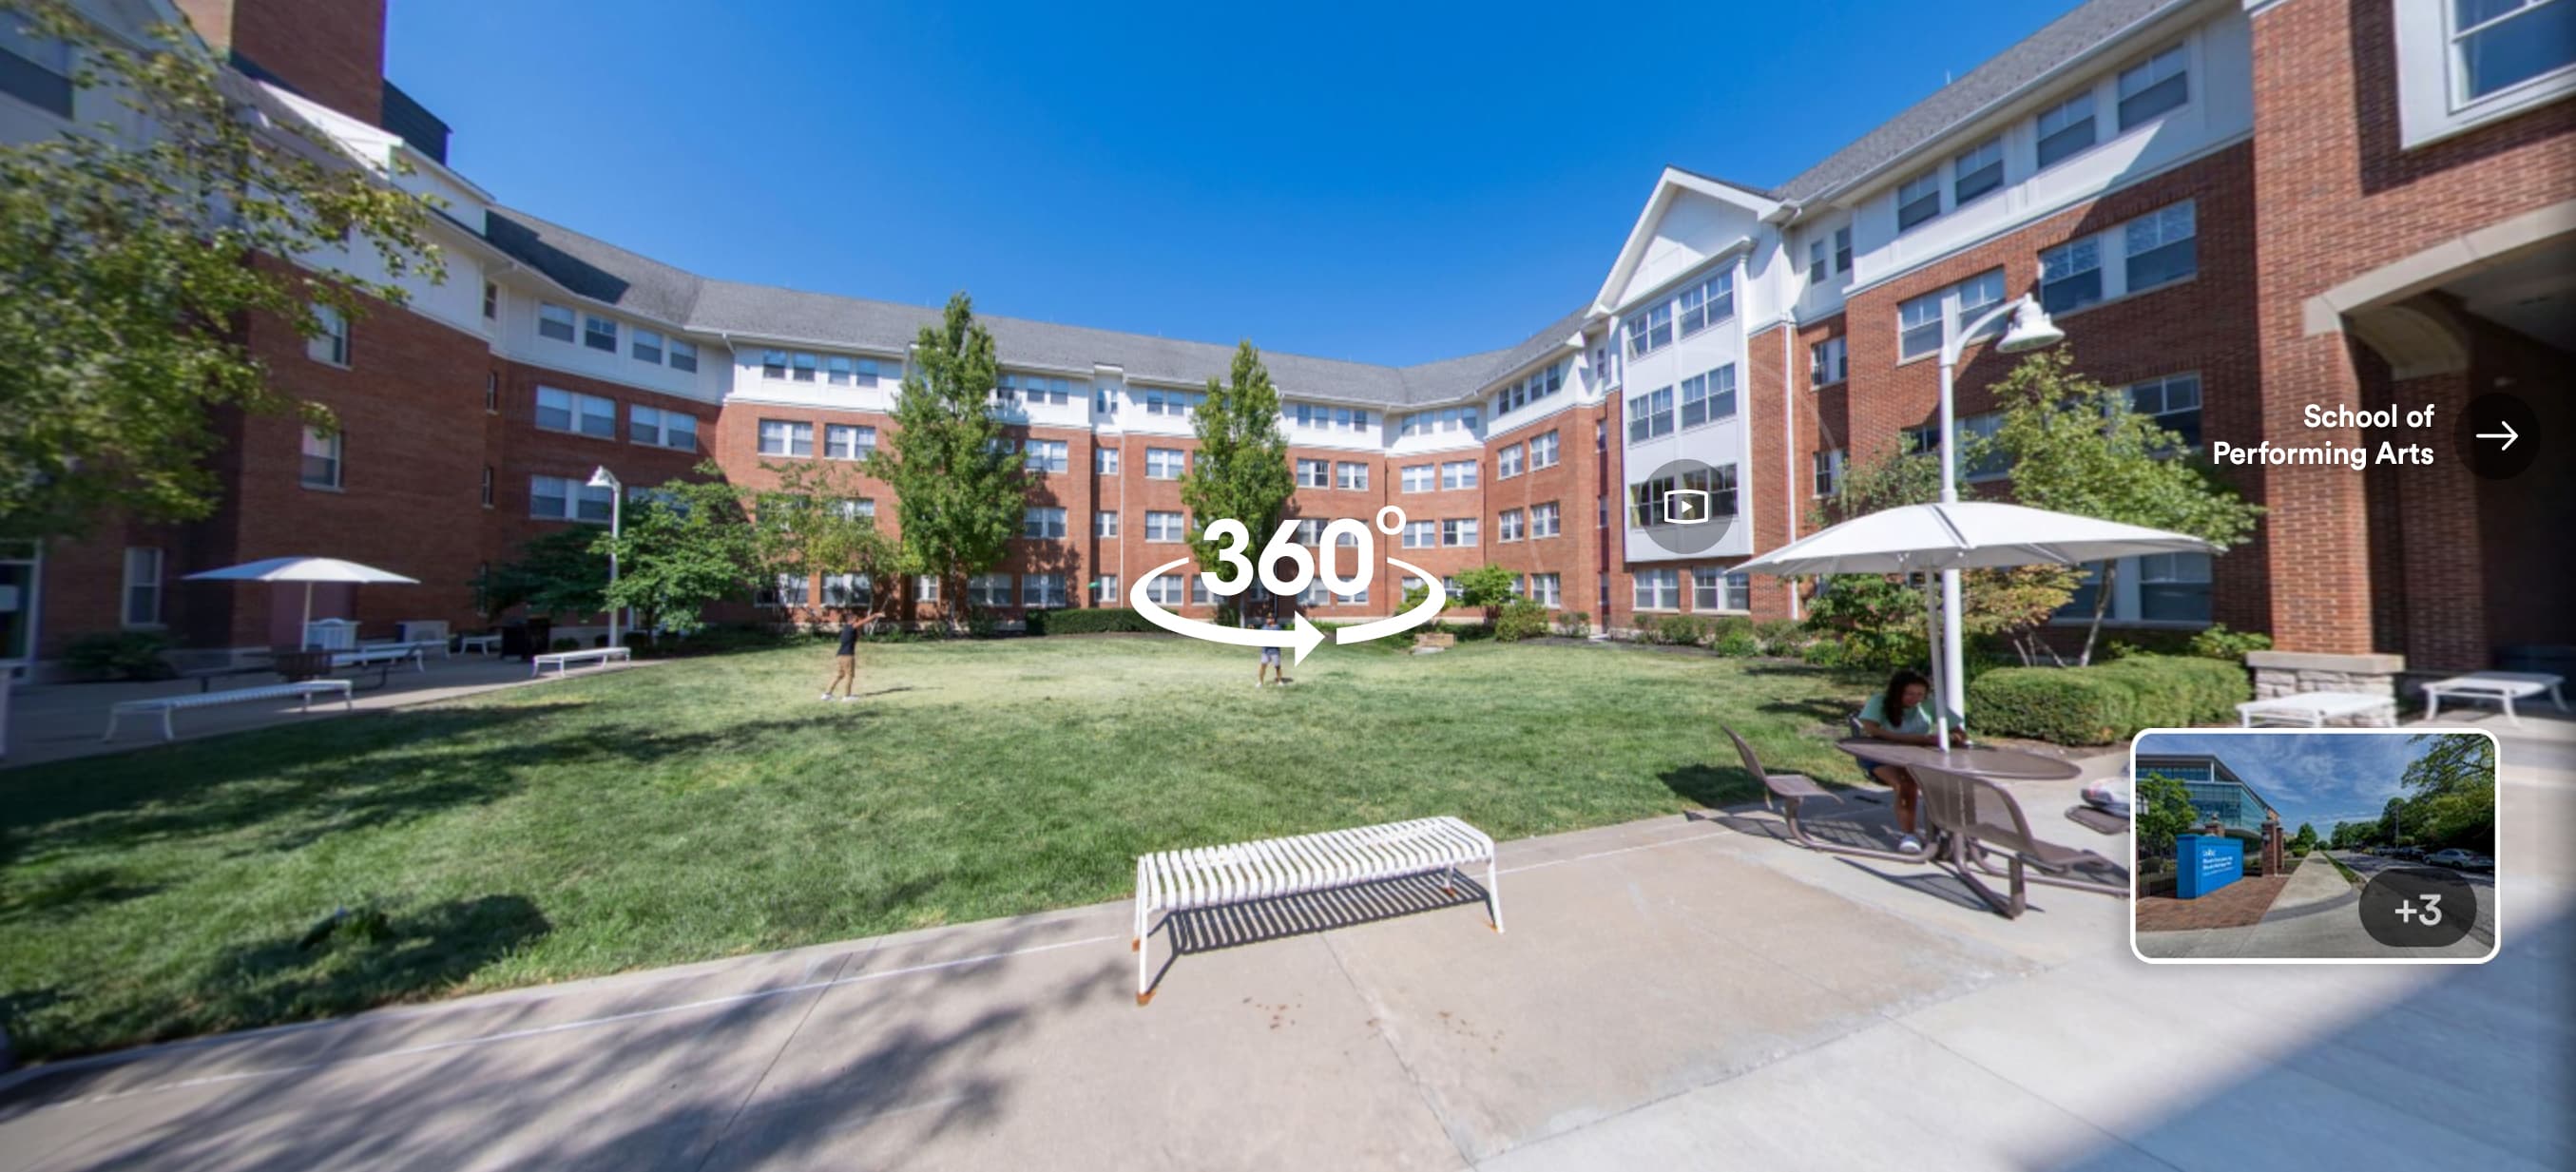 screenshot of buildings on campus with 360 written on it from virtual tour